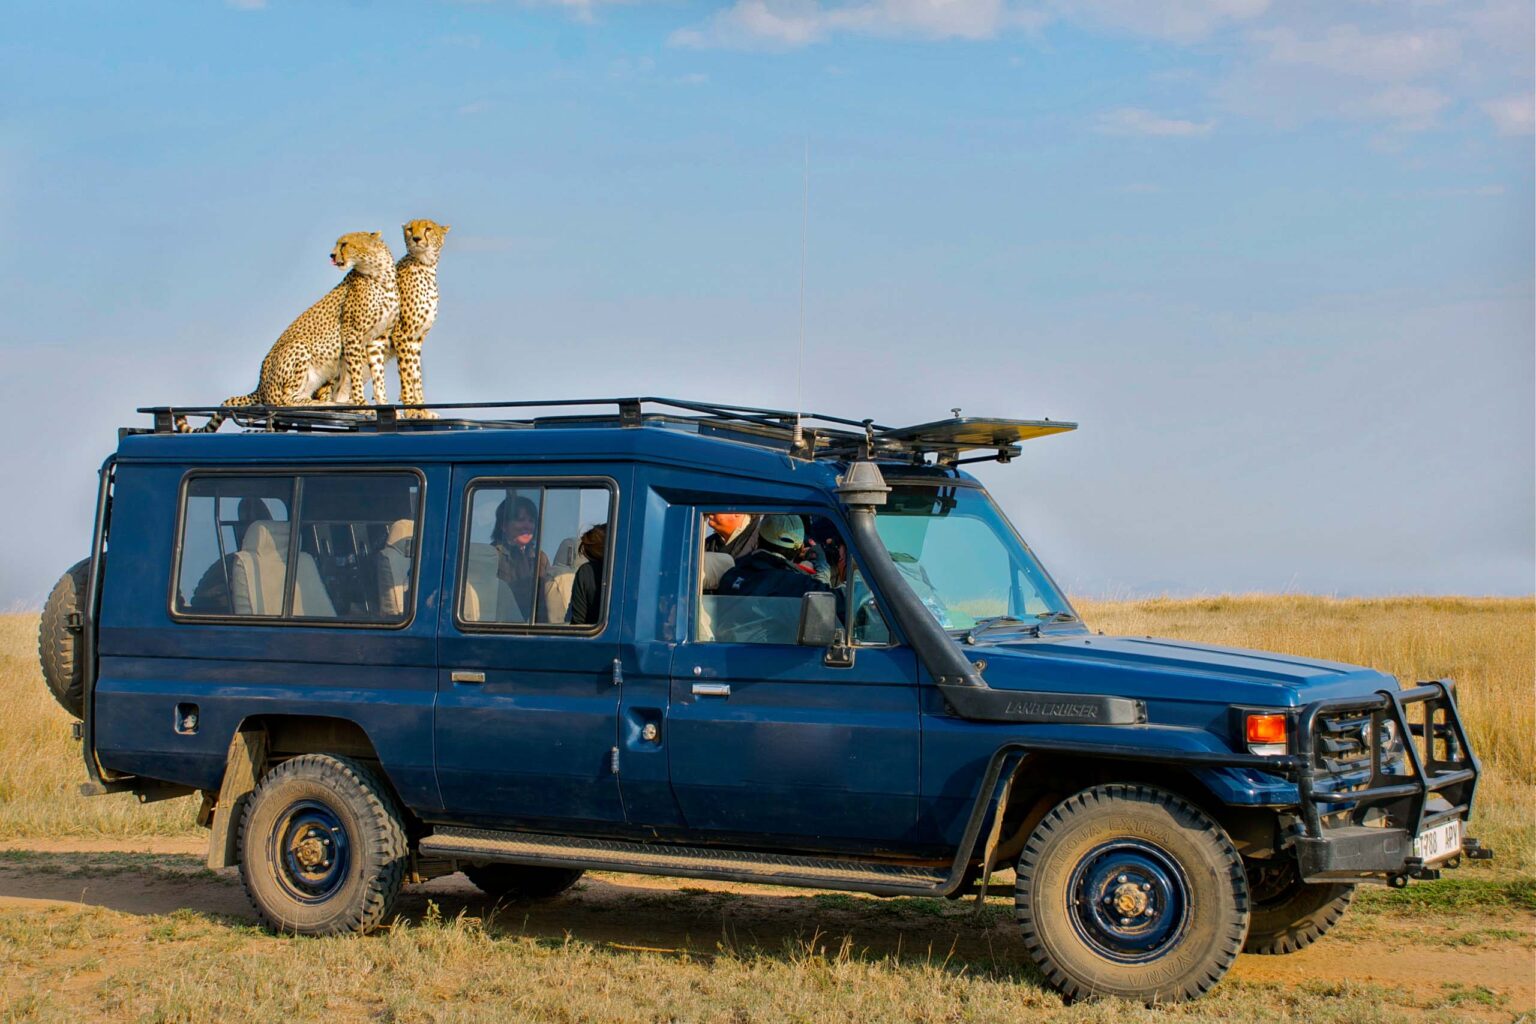 Two cheetahs on the roof of a safari vehicle.